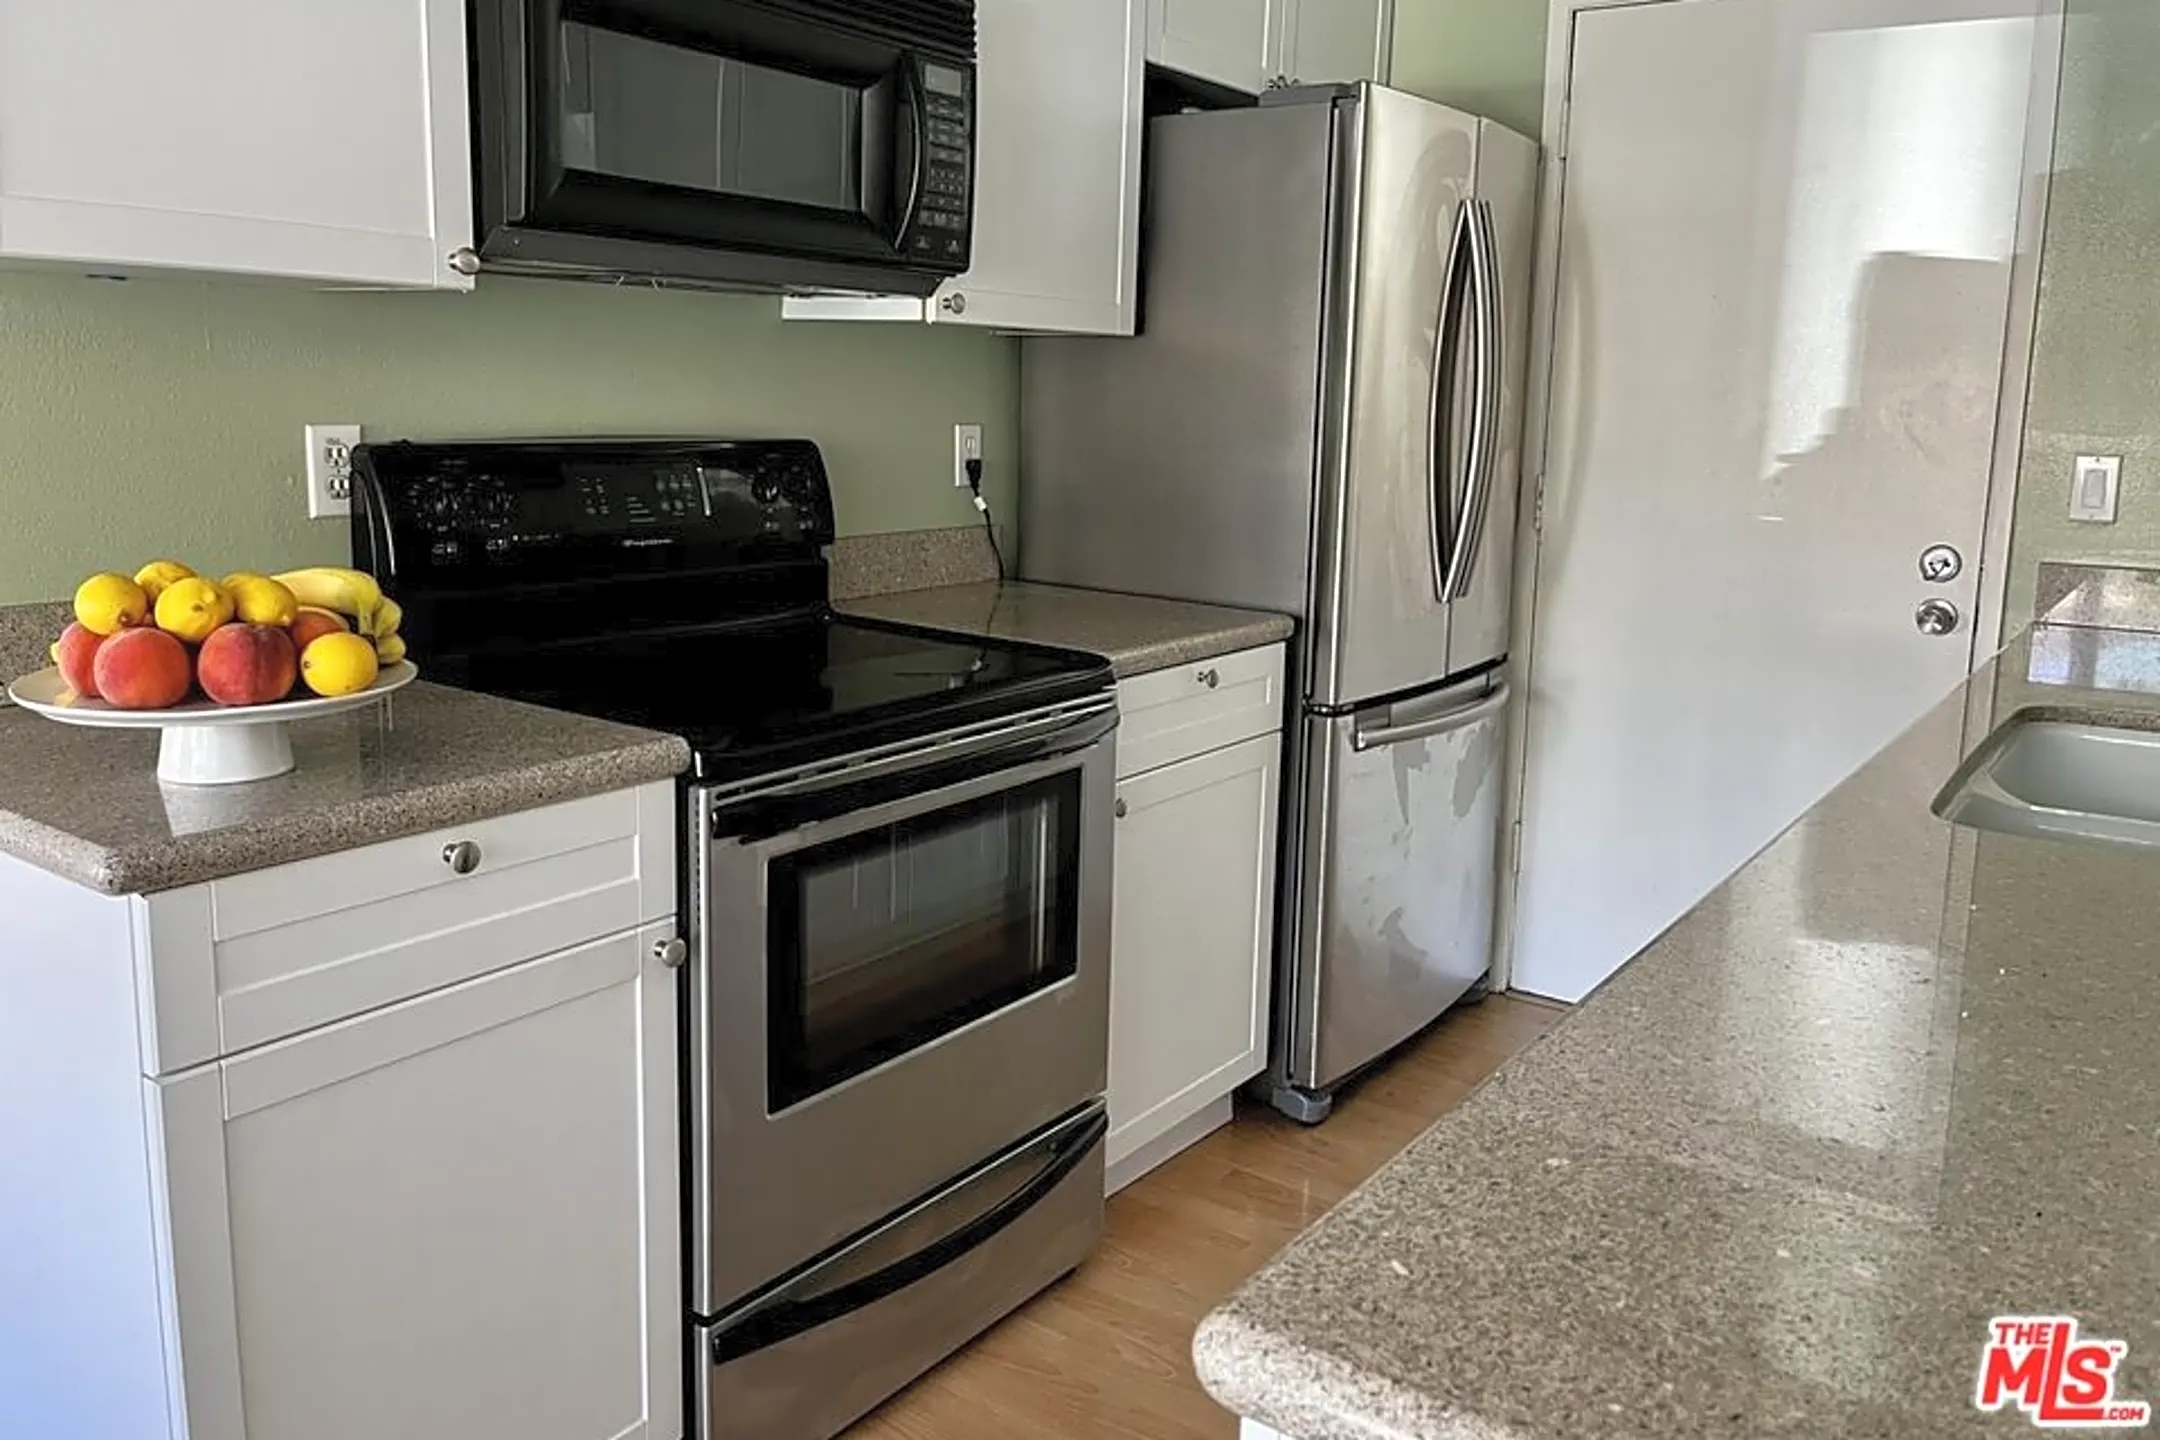 Kitchen - 525 N Sycamore Ave #204 - Los Angeles, CA